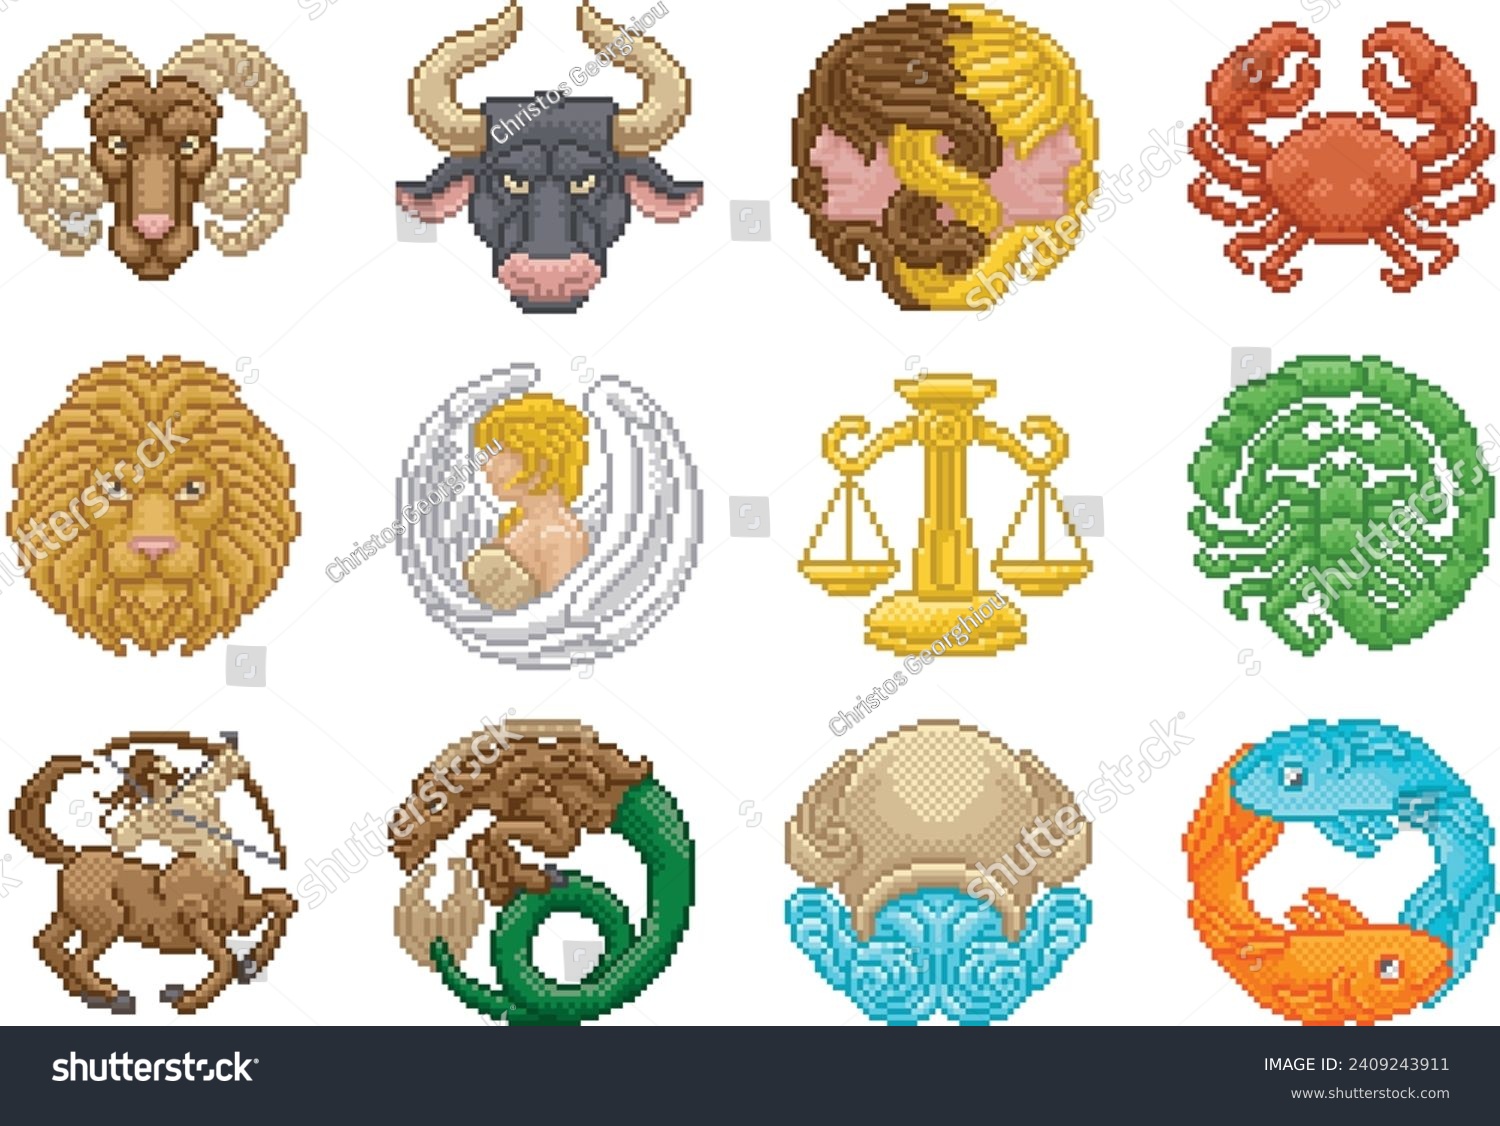 SVG of Zodiac horoscope or astrology signs in a retro video game arcade 8 bit pixel art style svg